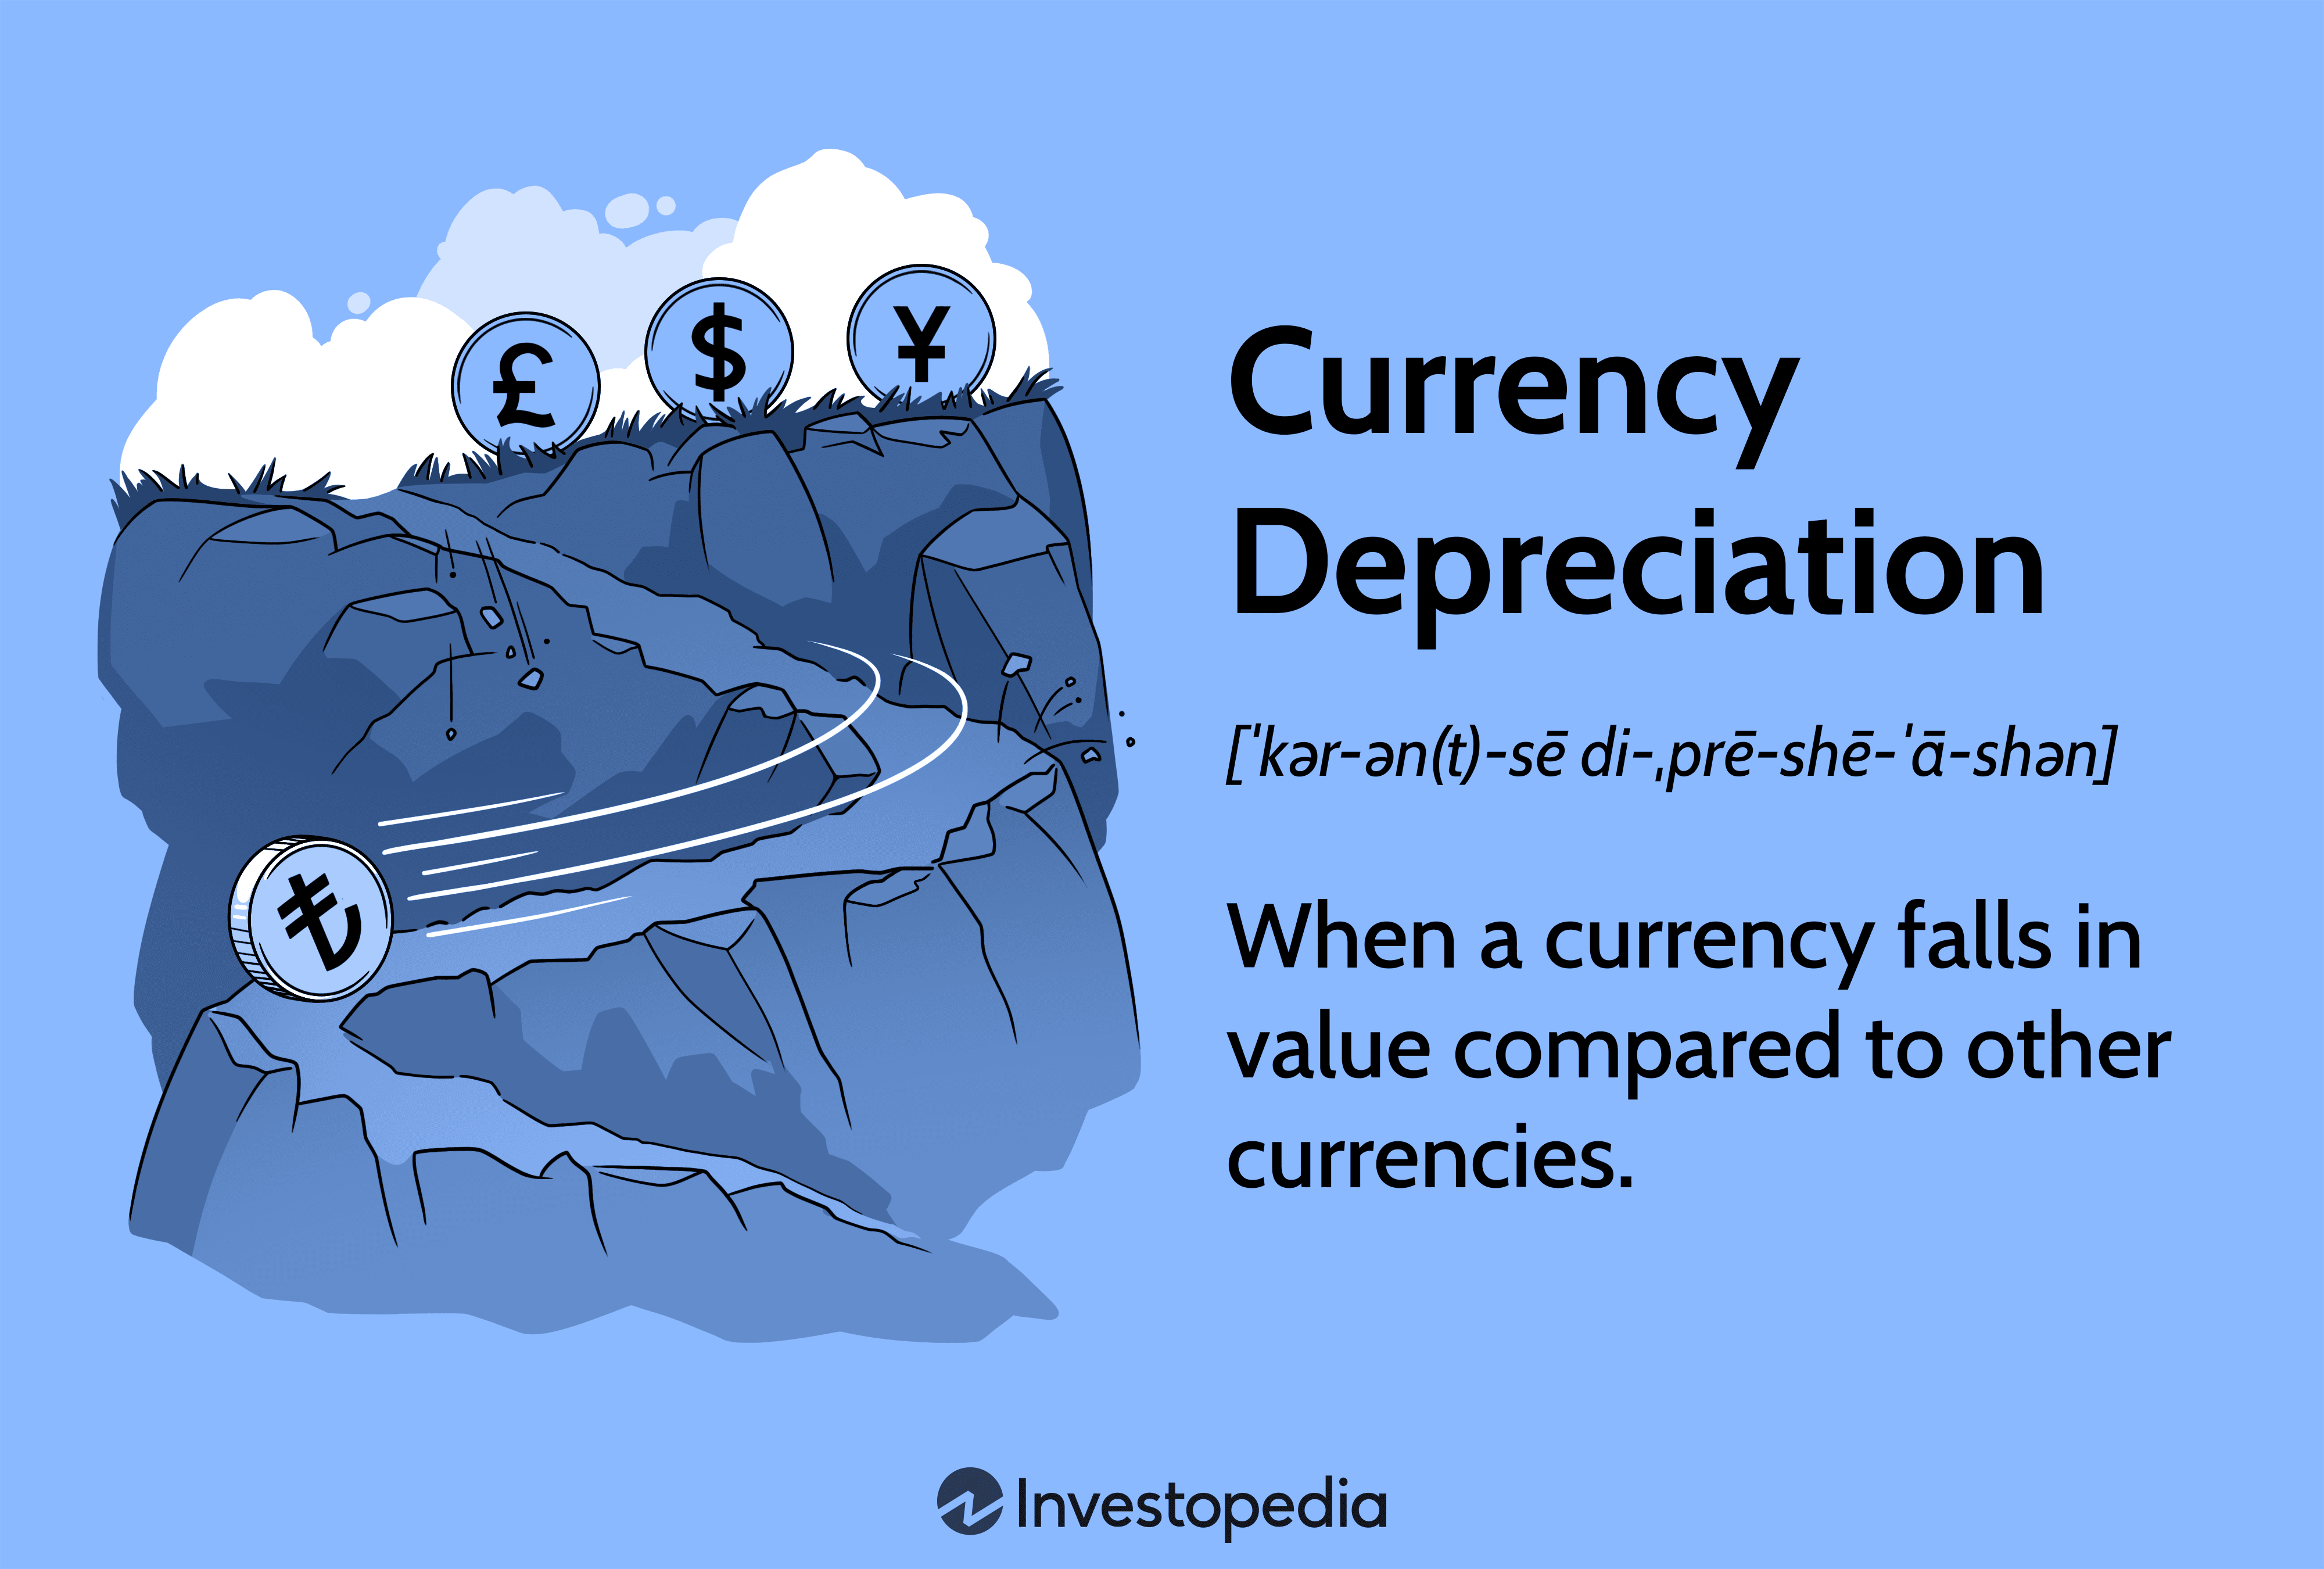 Currency Depreciation: When a currency falls in value compared to other currencies.